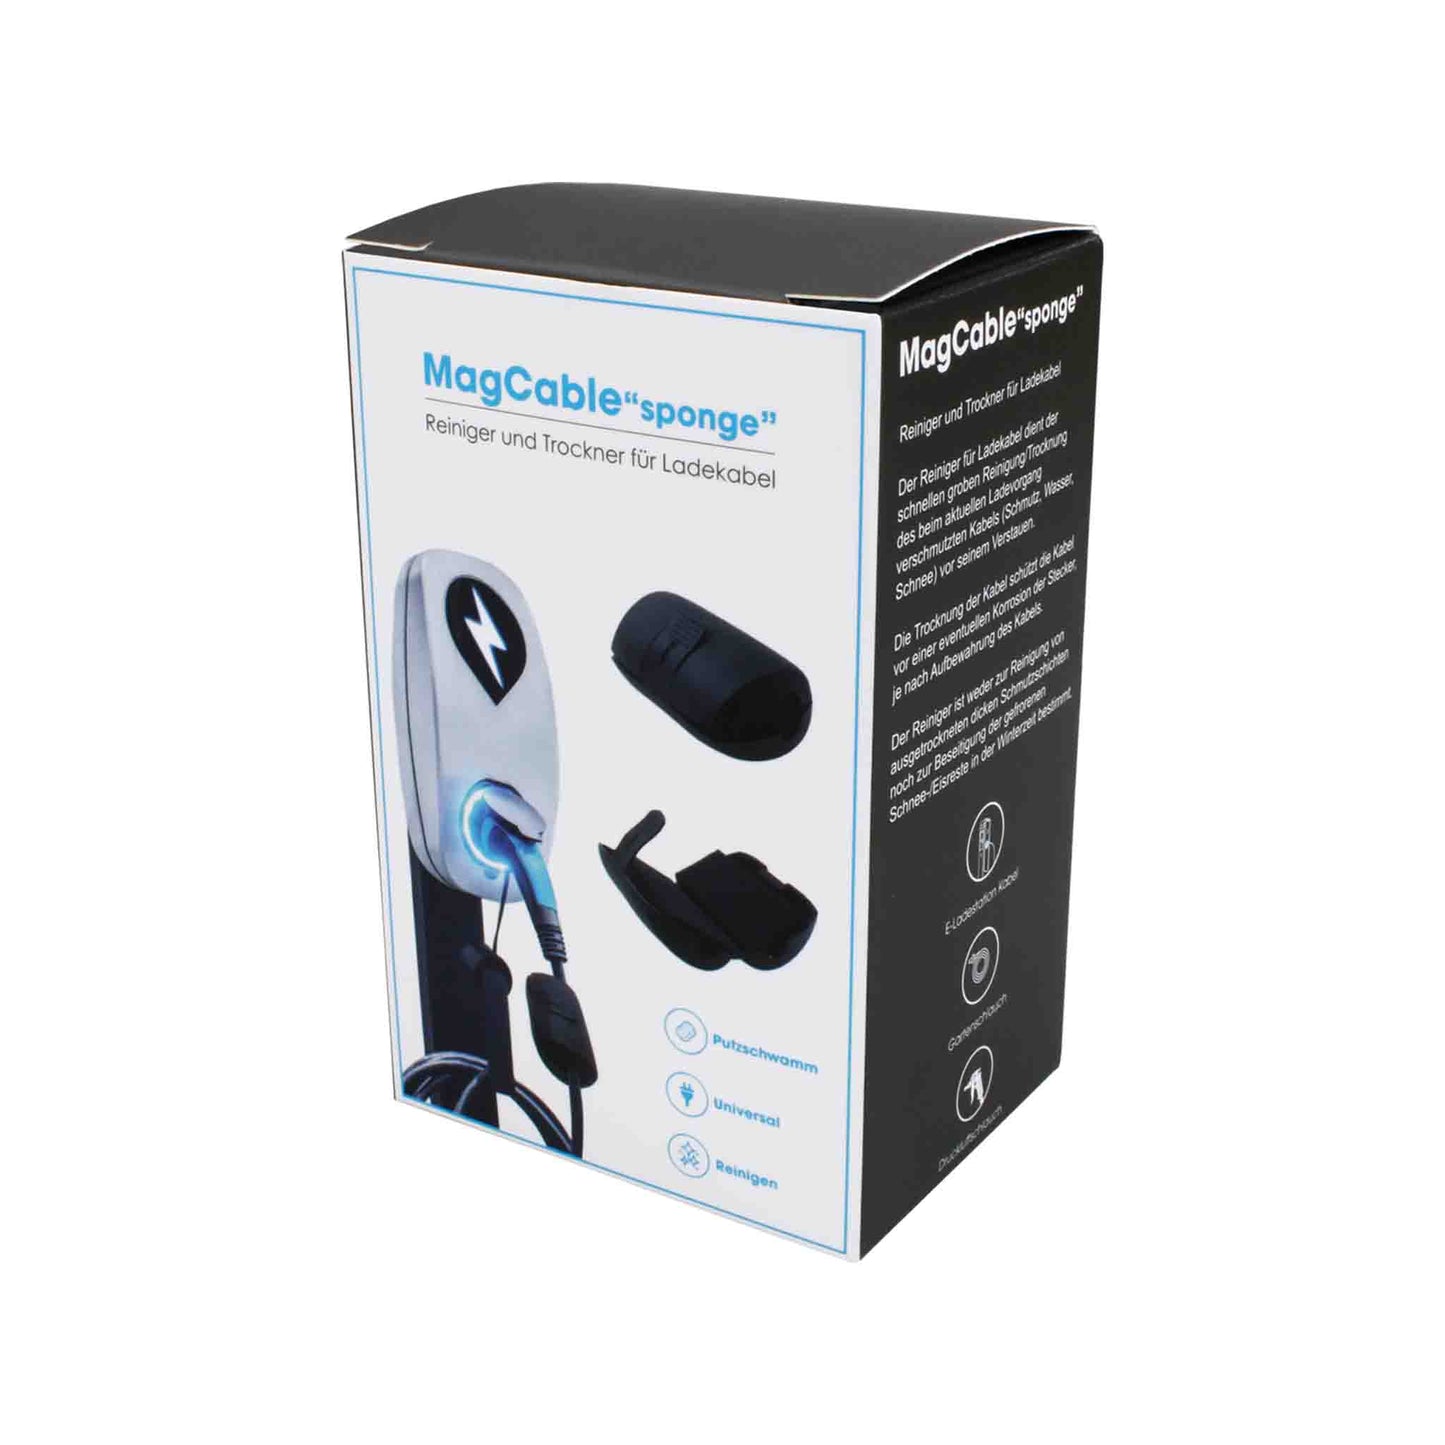 MagCable "sponge" charging cable cleaner